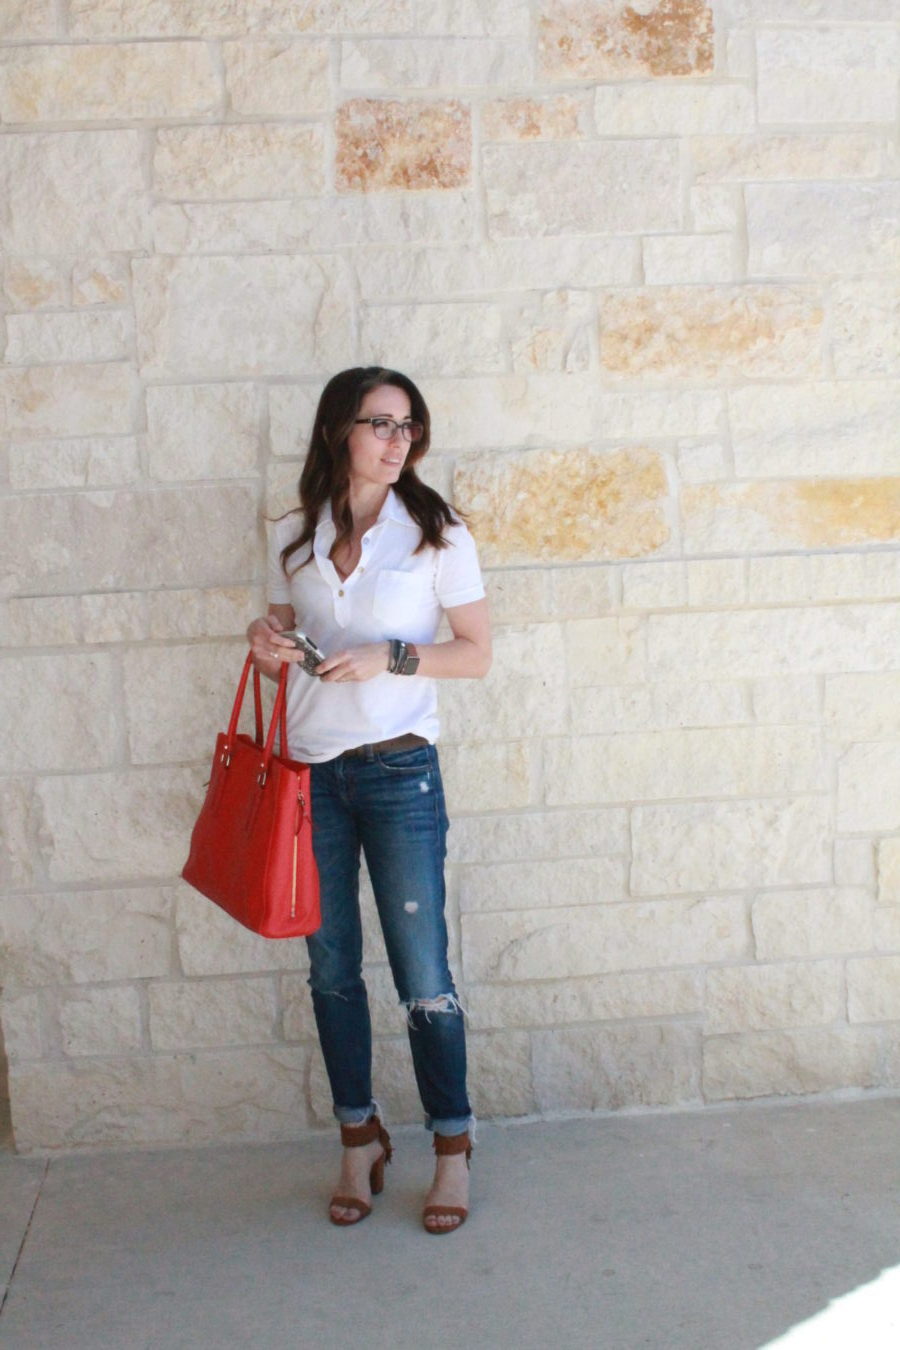 wardrobe stylist, personal stylist, method39, everyday street style, mom on the go, casual, classic, my style, red, white, blue, heels, today's look